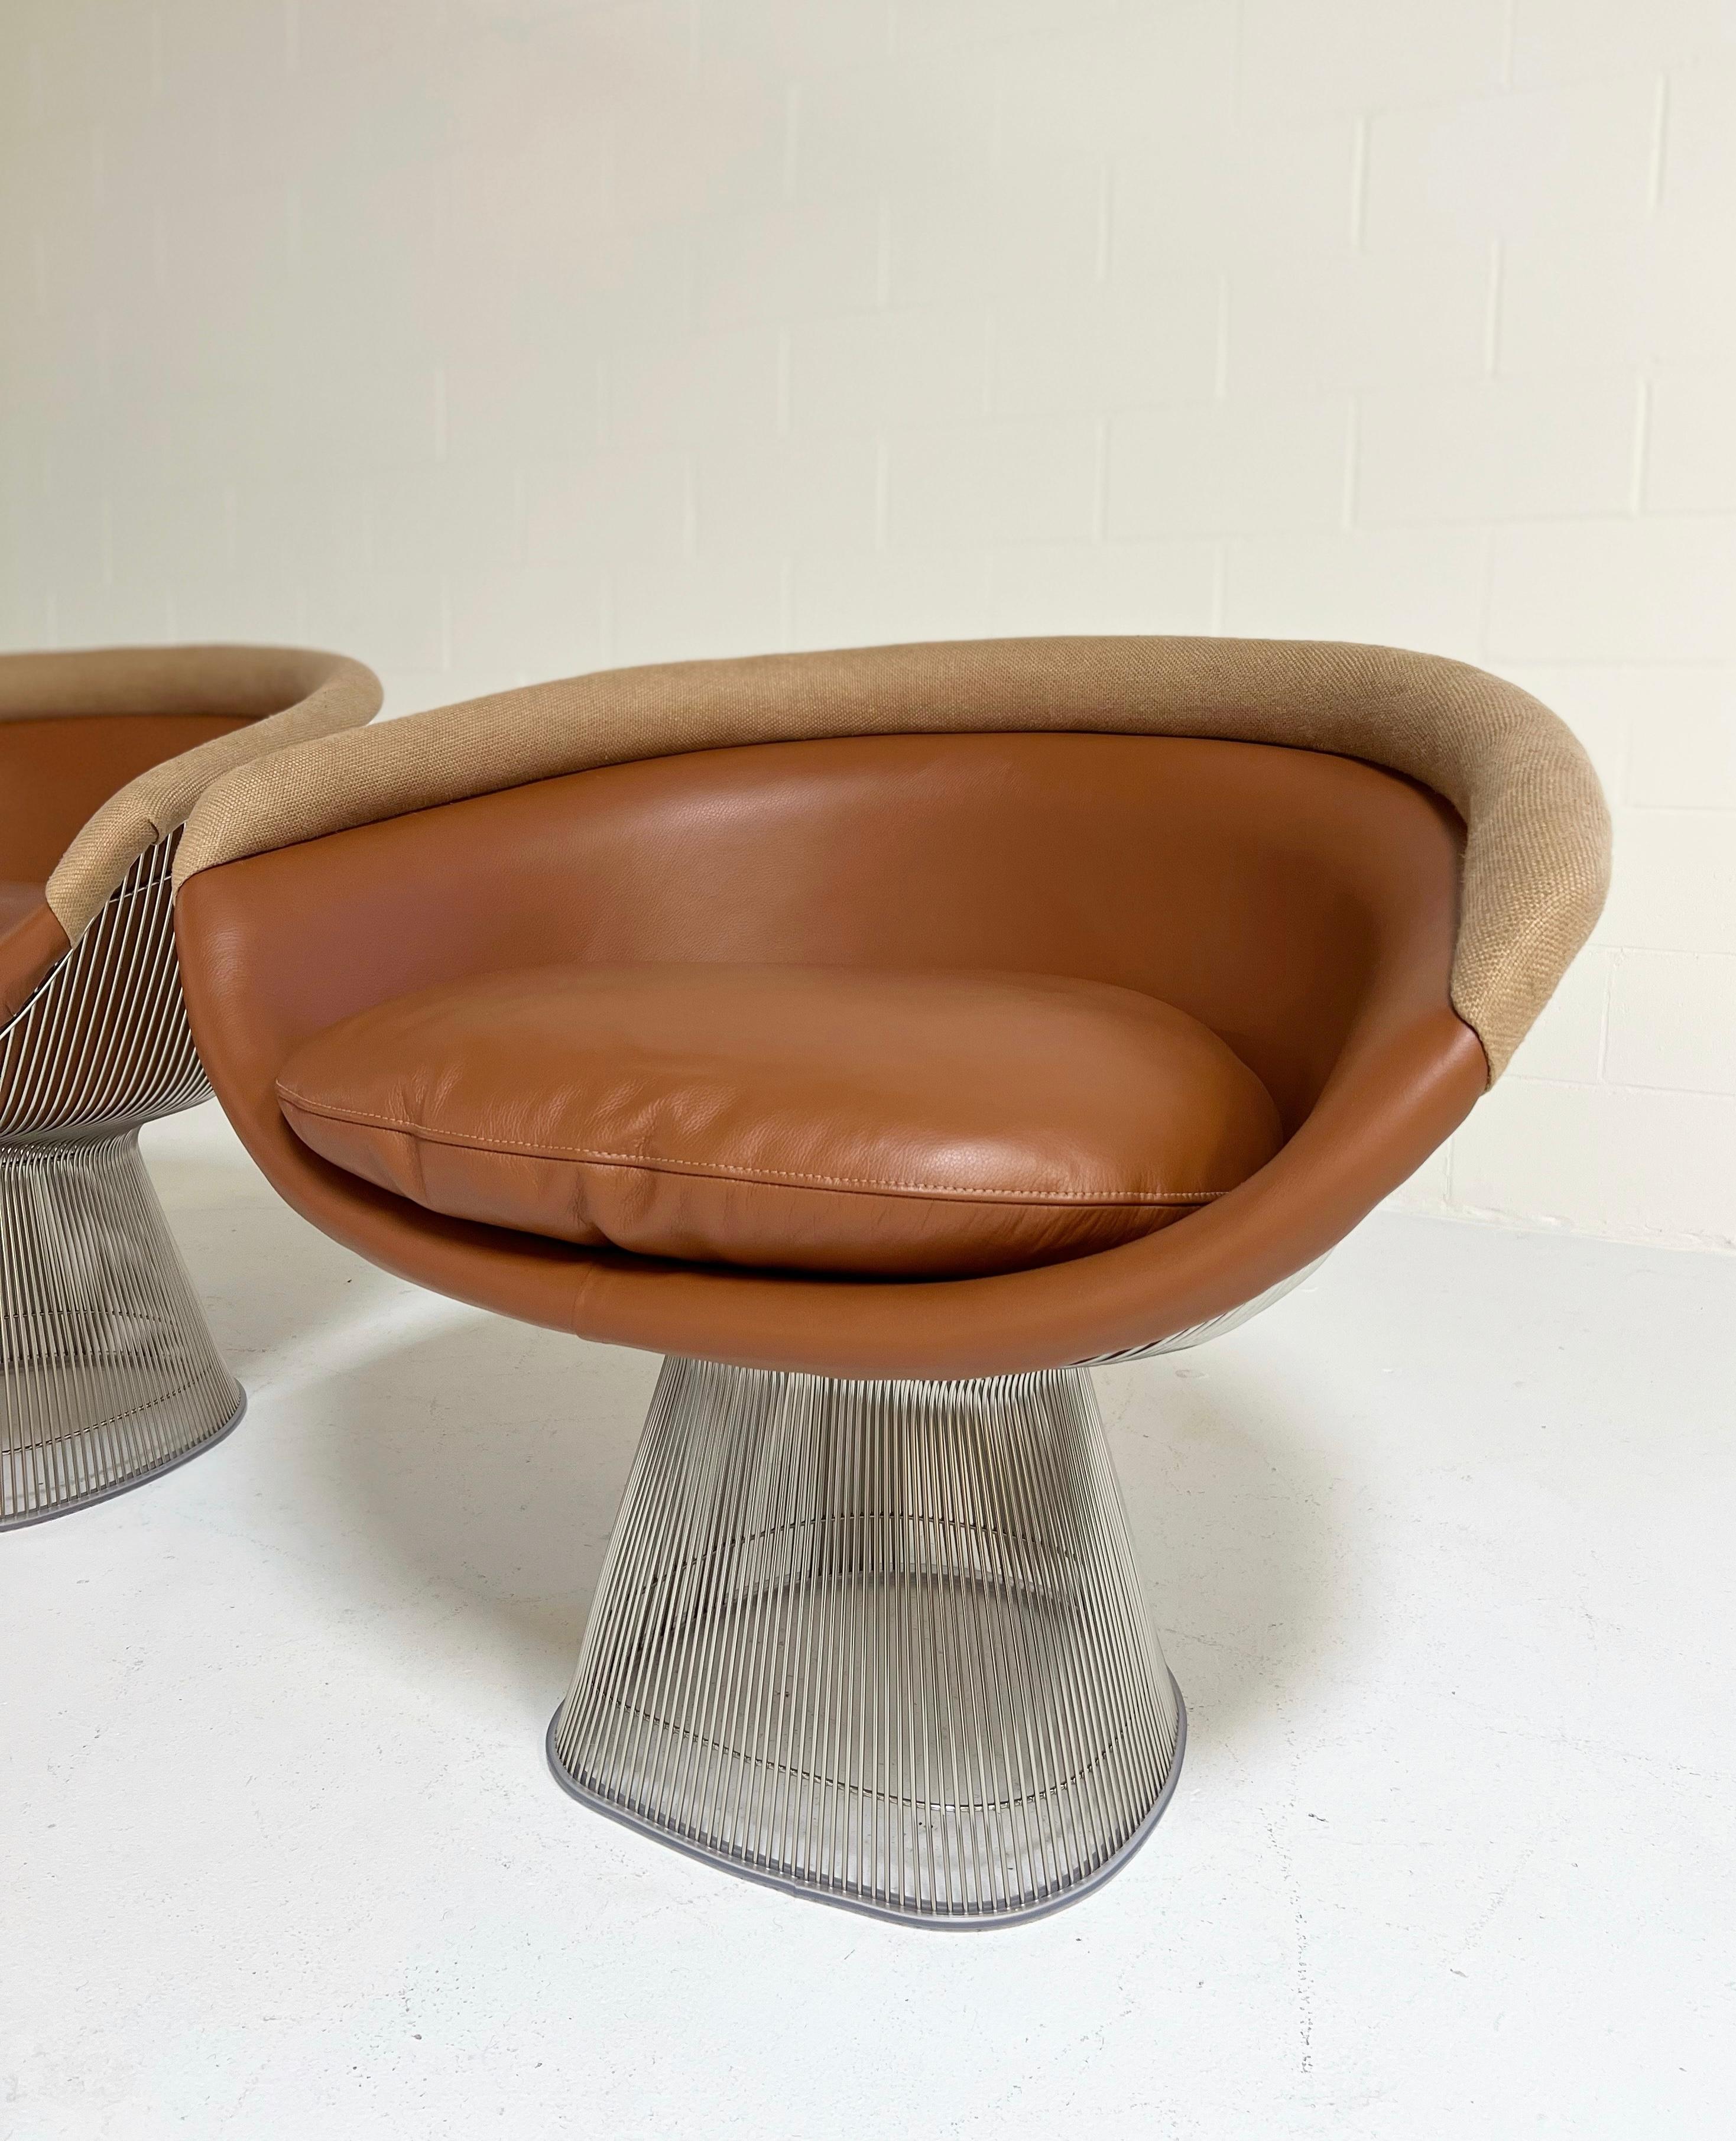 Warren Platner Lounge Chairs, Restored in Loro Piana Leather and Linen, Pair For Sale 4